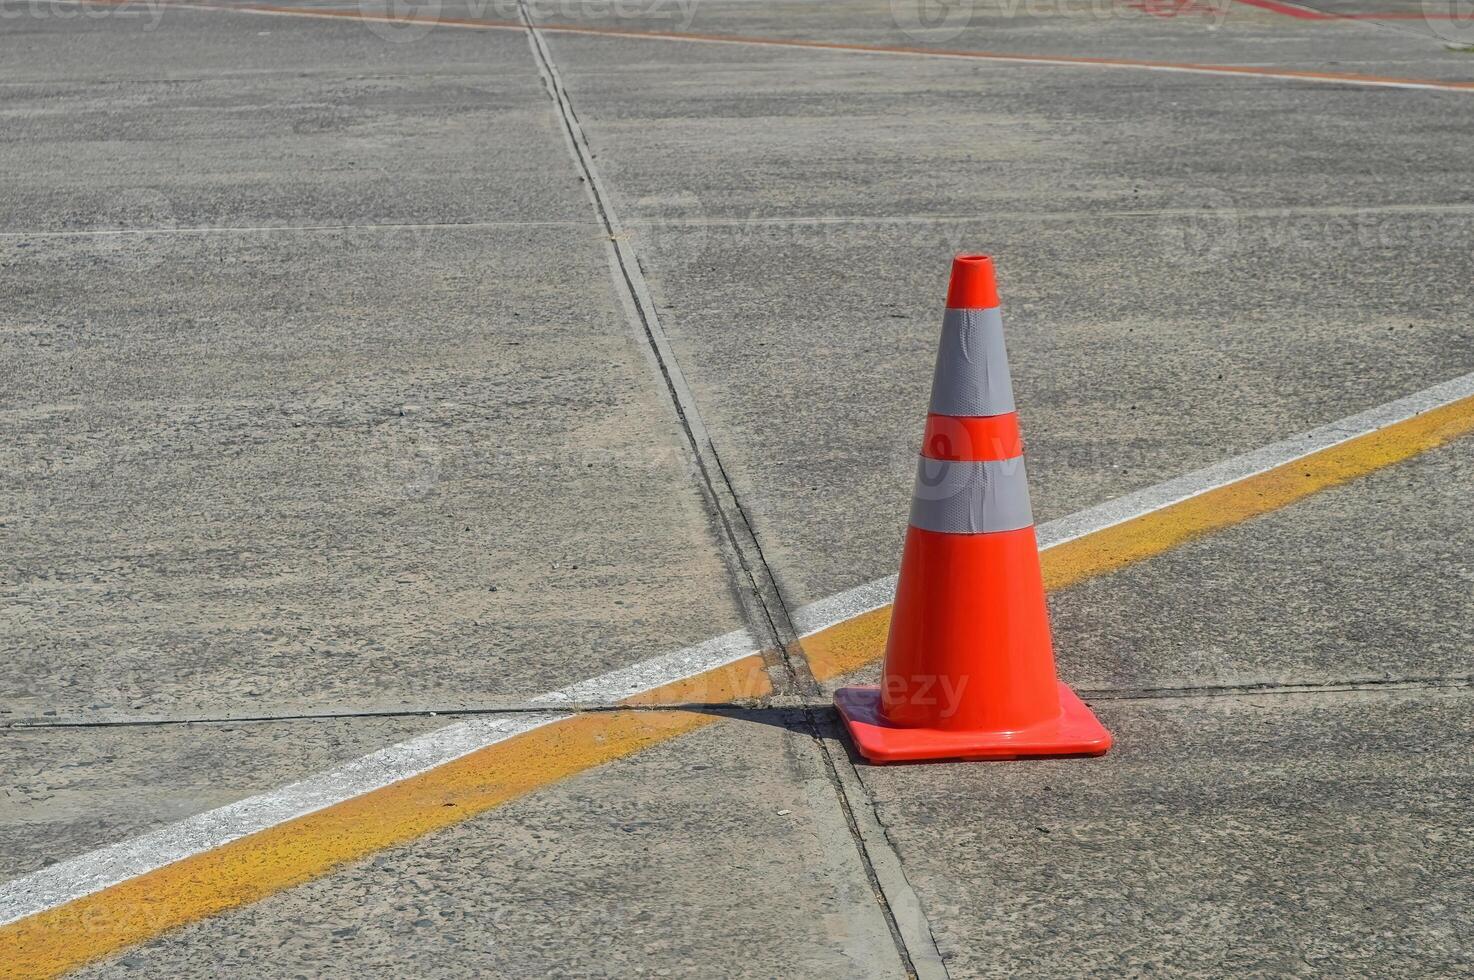 a traffic cone in the middle of the Juanda International Airport apron photo